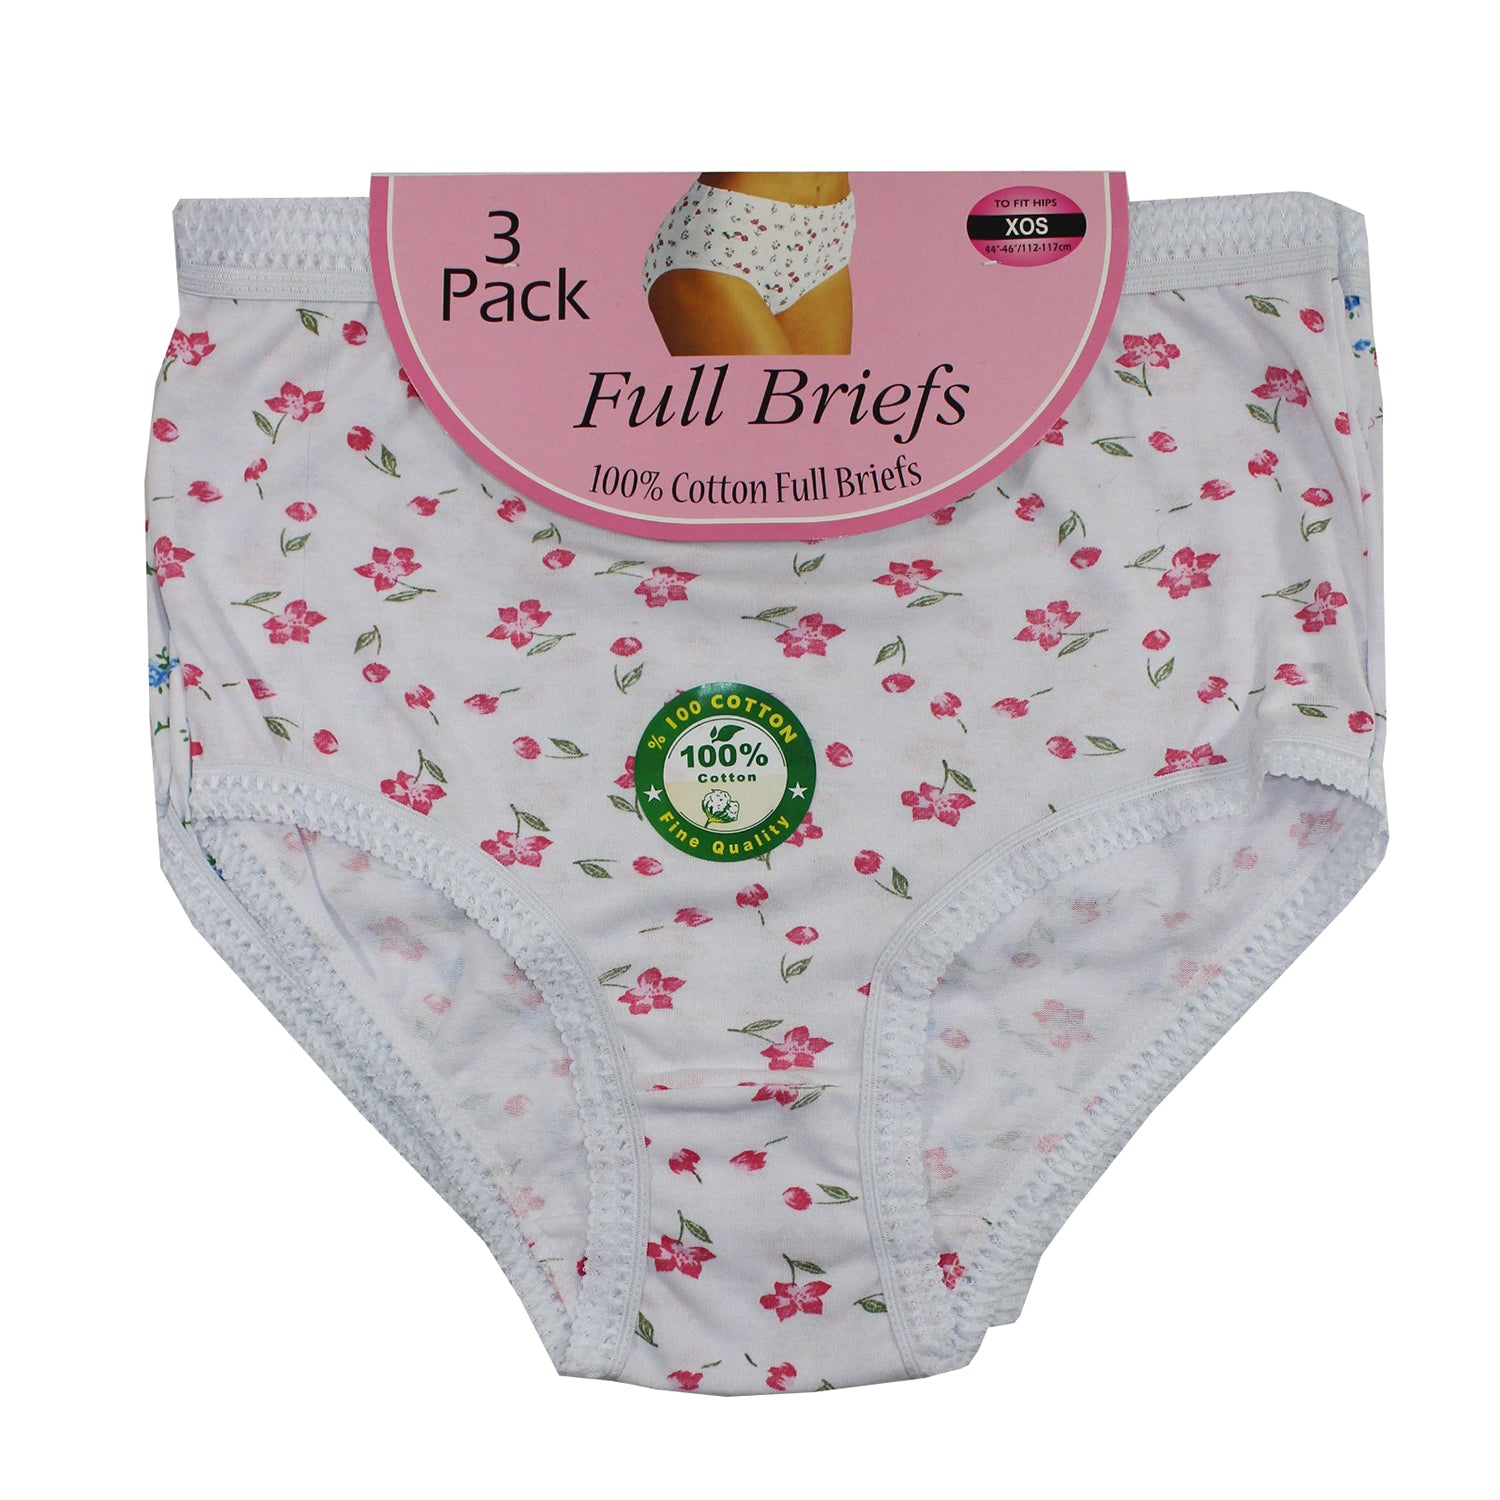 100% Cotton Full Brief Panty Pack (Pack of 3) - D024 - Solid